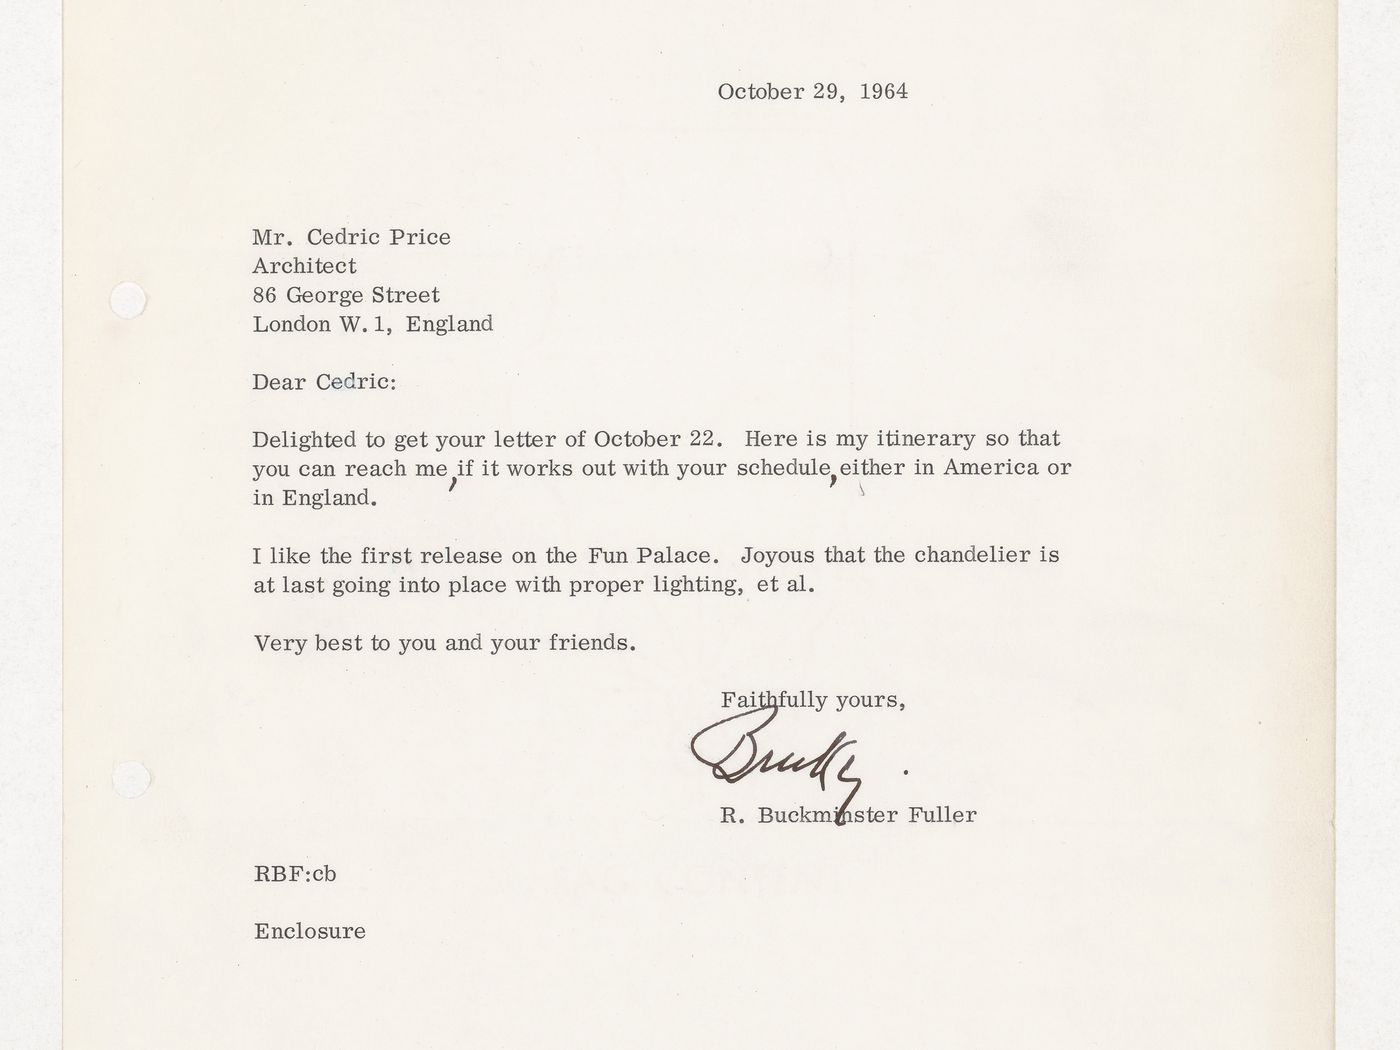 Letter from R. Buckminster Fuller to Cedric Price regarding meeting in either America or England